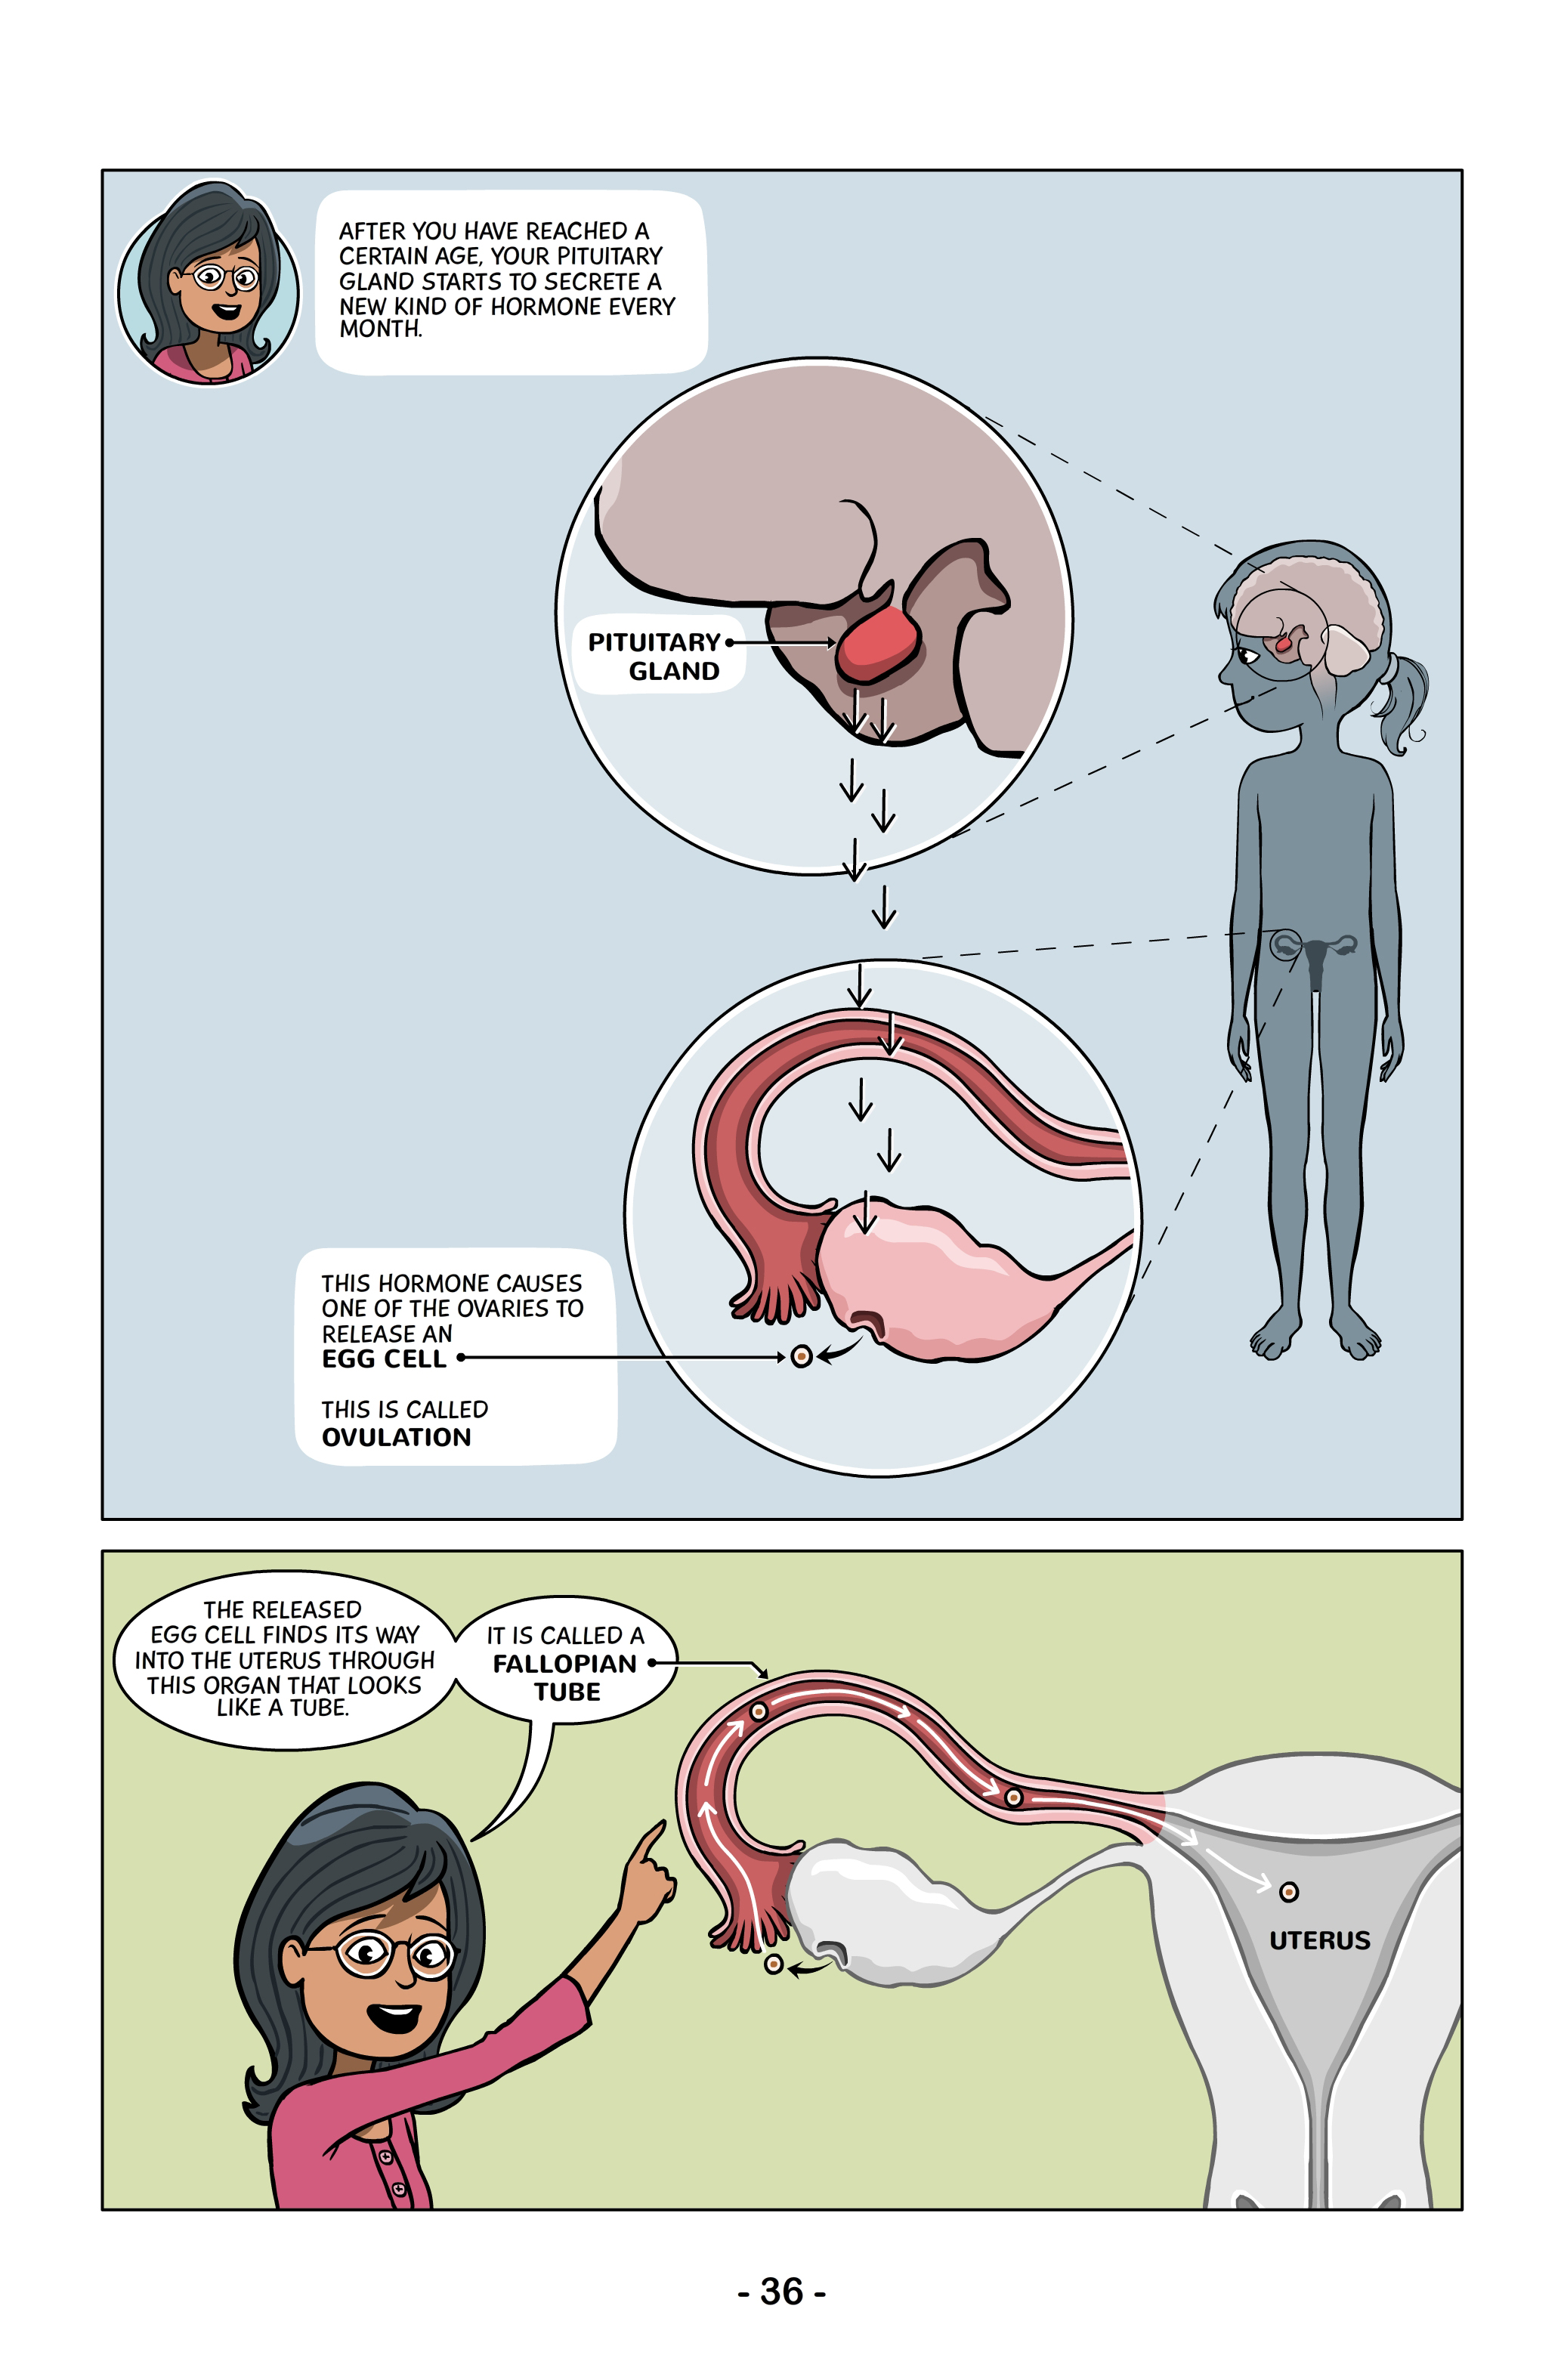 Recent research carried out to coincide with Menstrual Hygiene Day reported only 2.5% of schoolgirls across South Asia knew that menstrual blood came from the uterus. Gupta's <em>Menstrupedia Comic</em> is intended to be used as an educational guide to raise awareness and dispel the myths that surround menstruation and women's health (Menstrupedia)